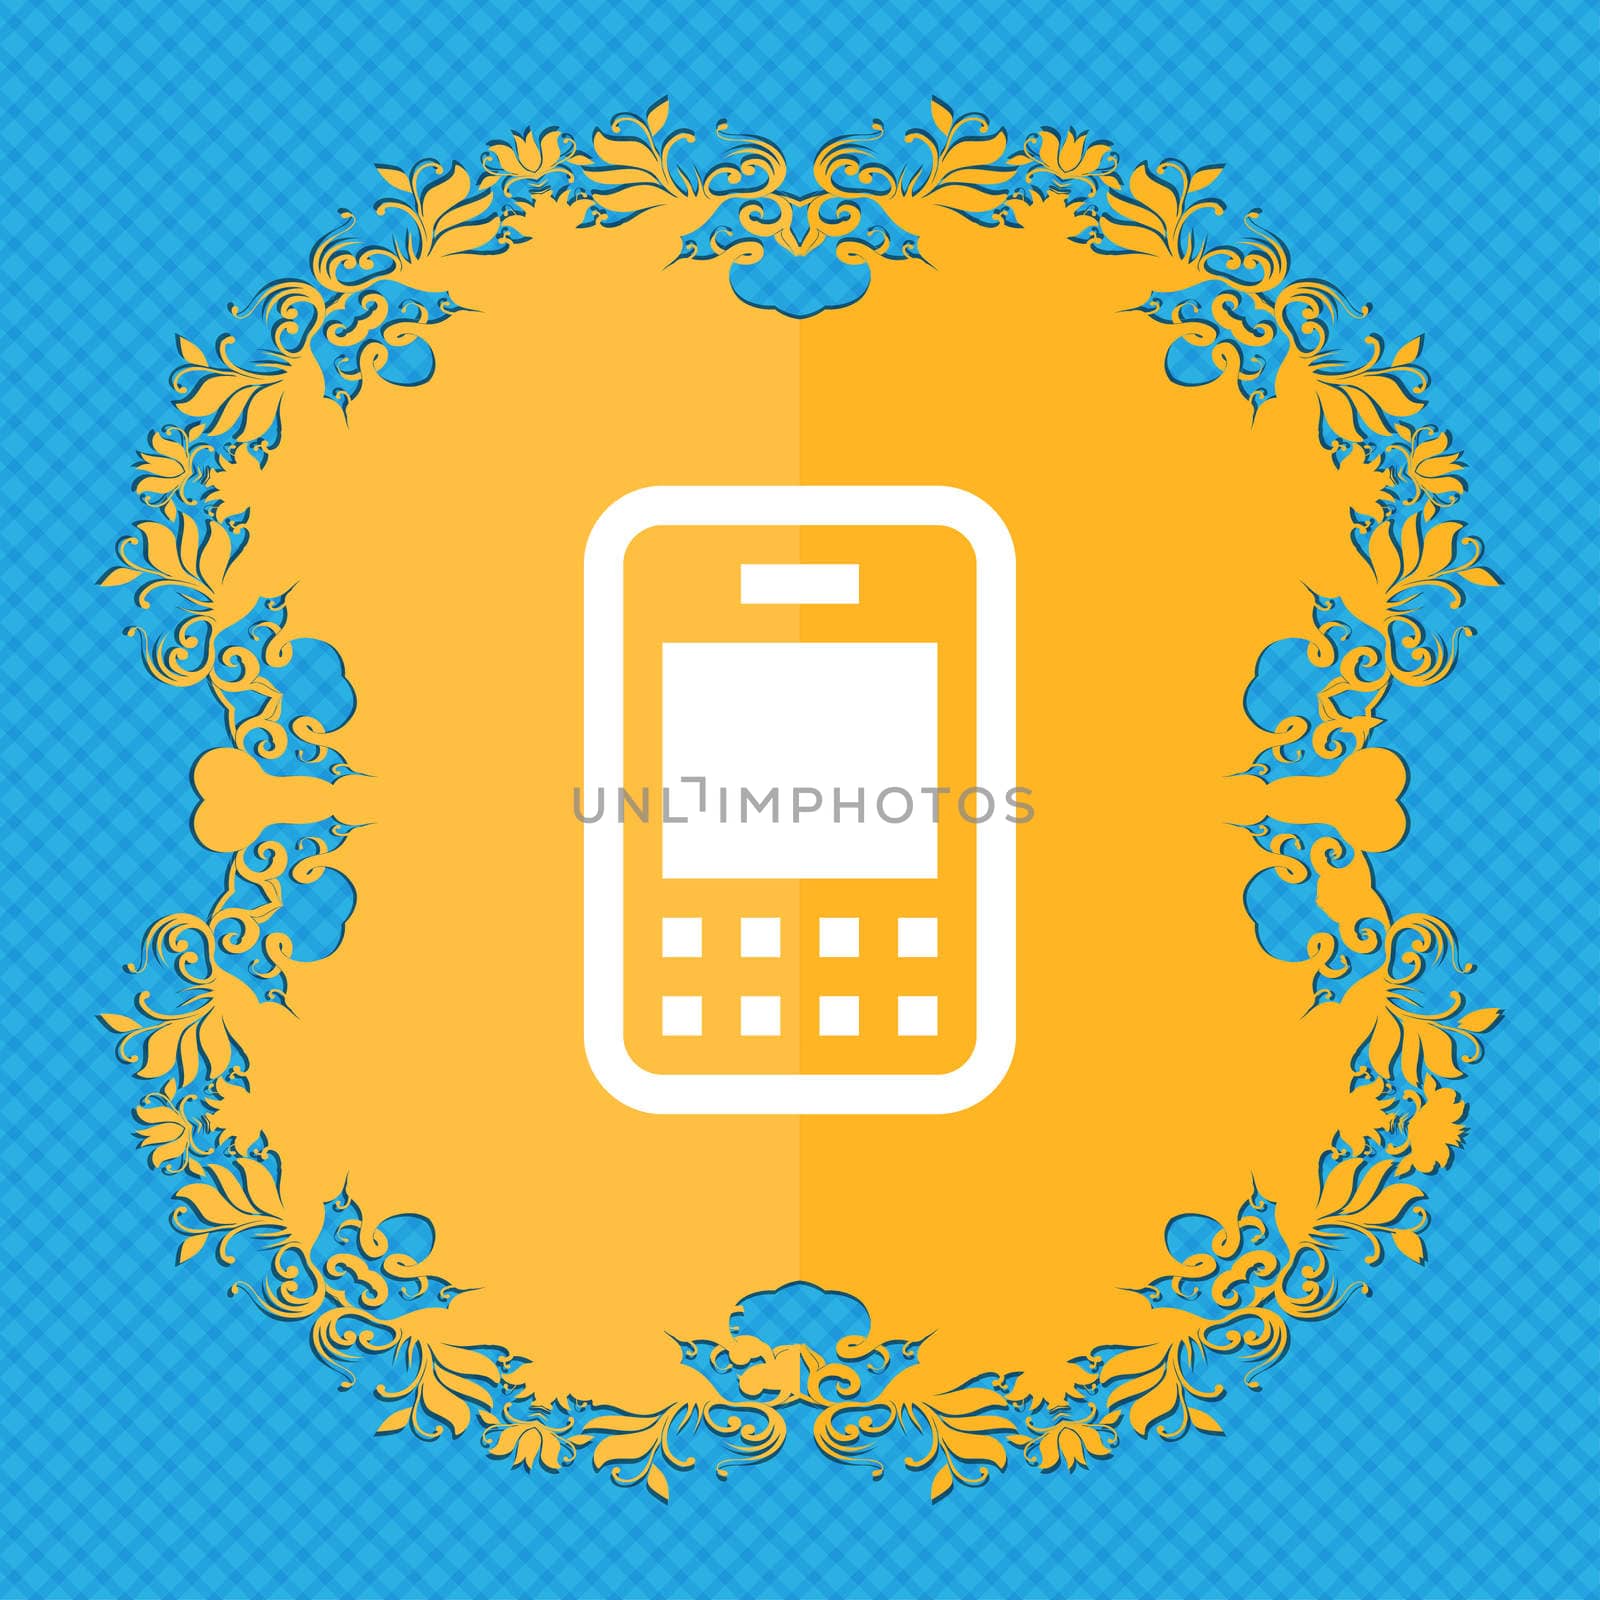 Mobile telecommunications technology . Floral flat design on a blue abstract background with place for your text. illustration